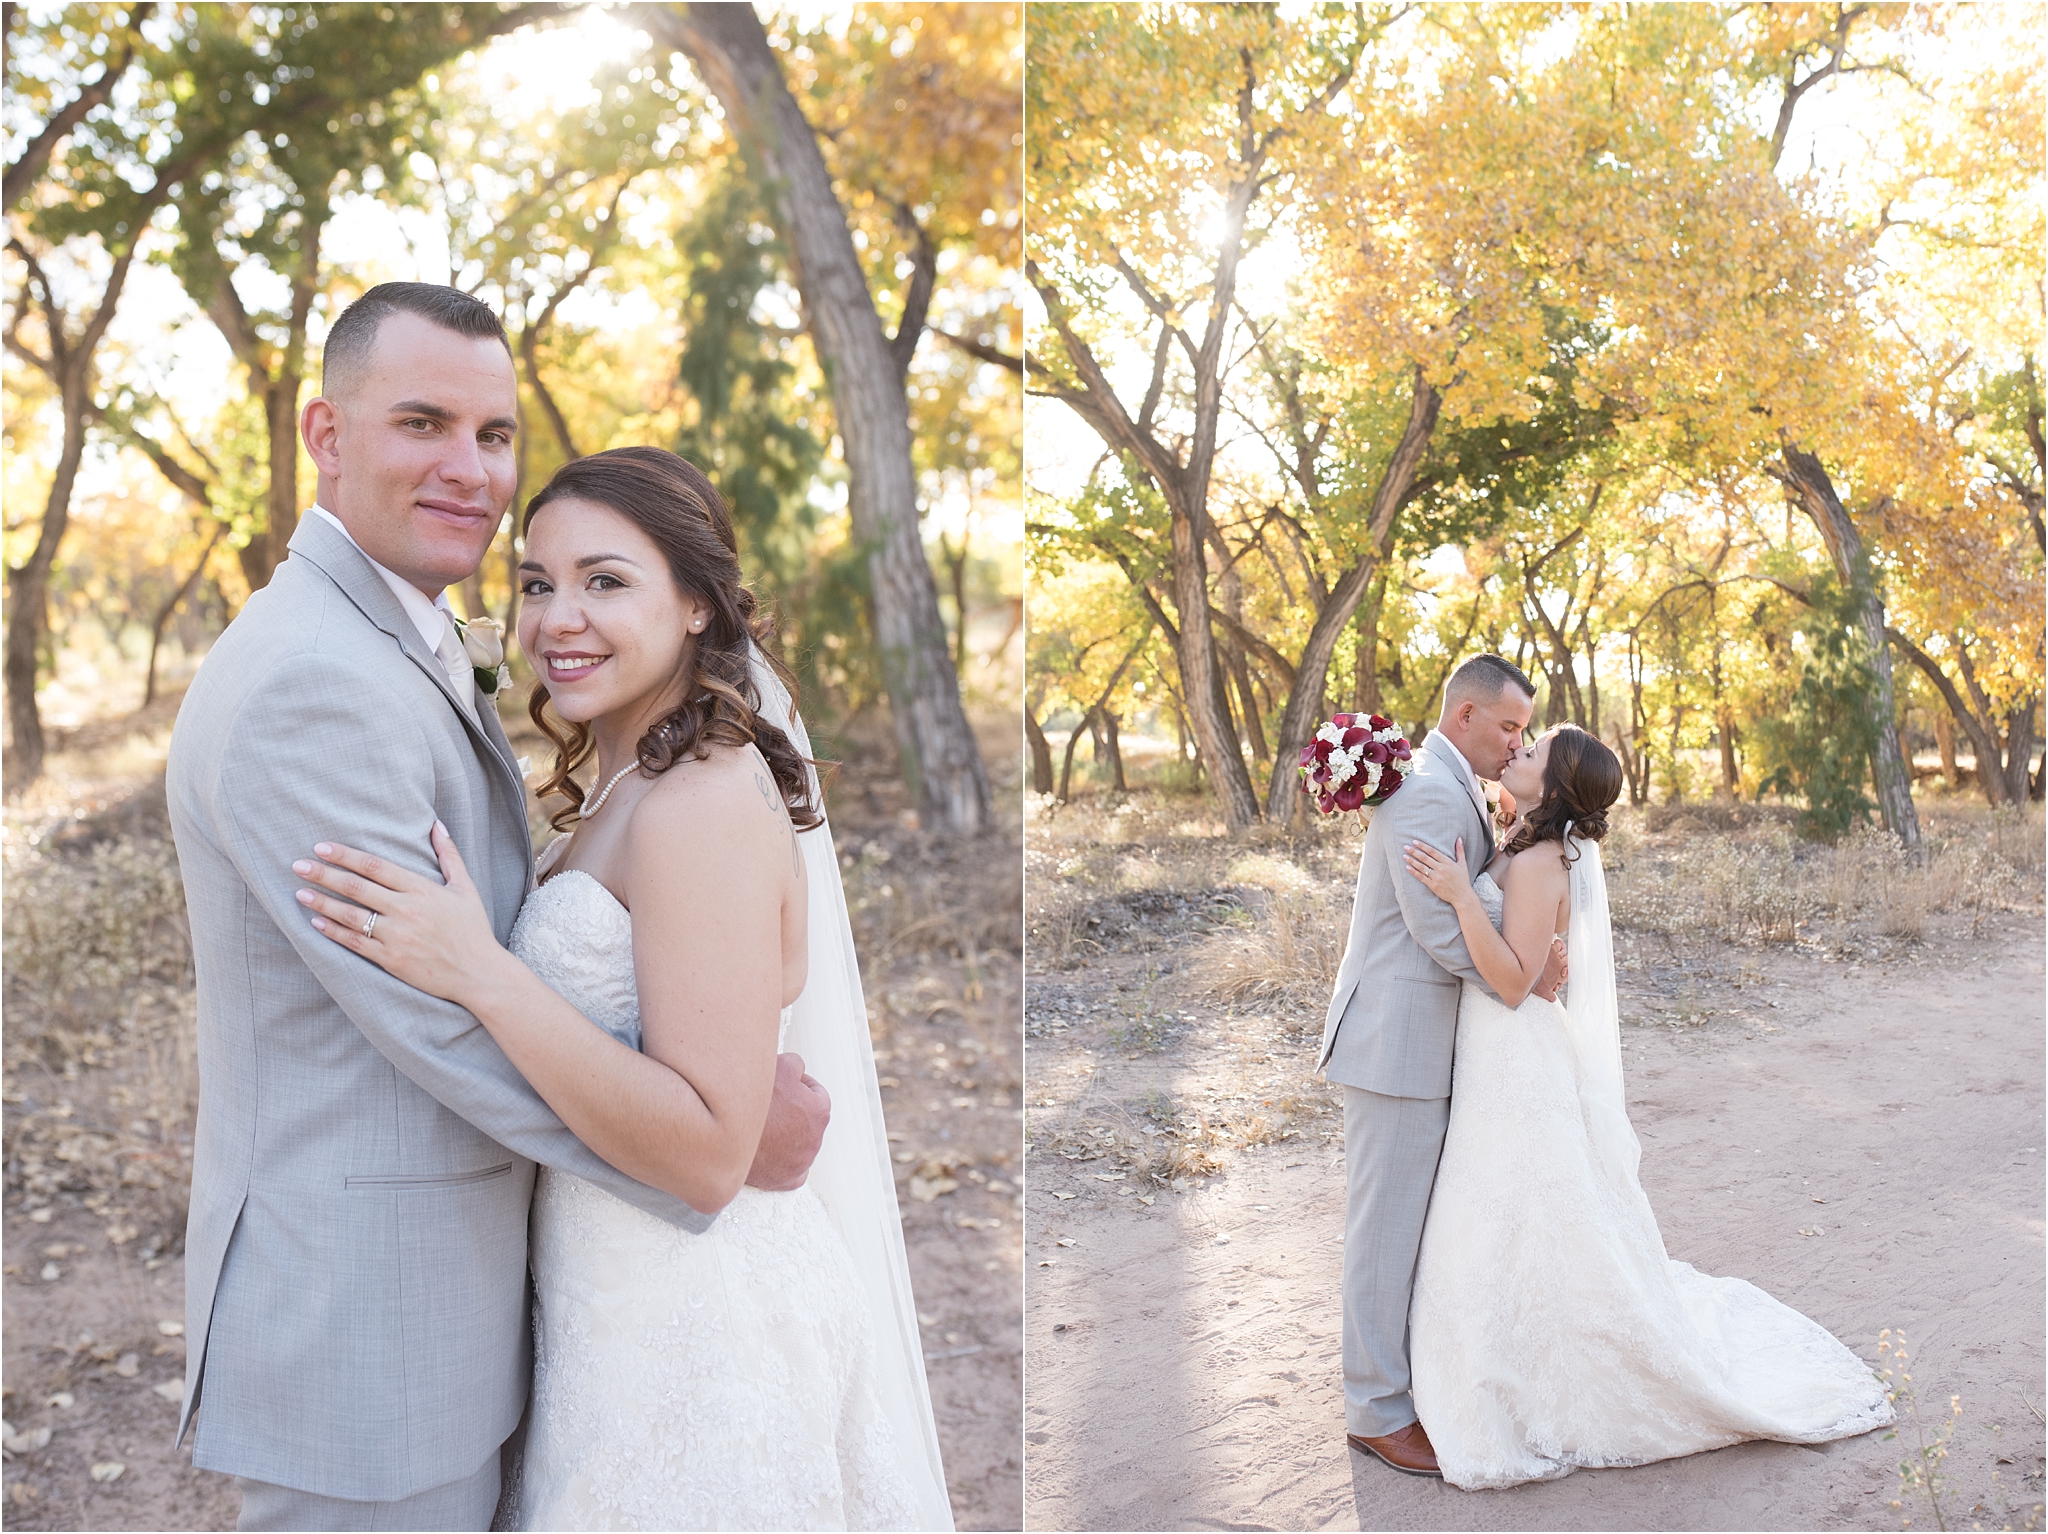 kayla kitts photography - albuquerque wedding photographer - hairpins and scissors - a cake odyssey - new mexico wedding photographer_0050.jpg